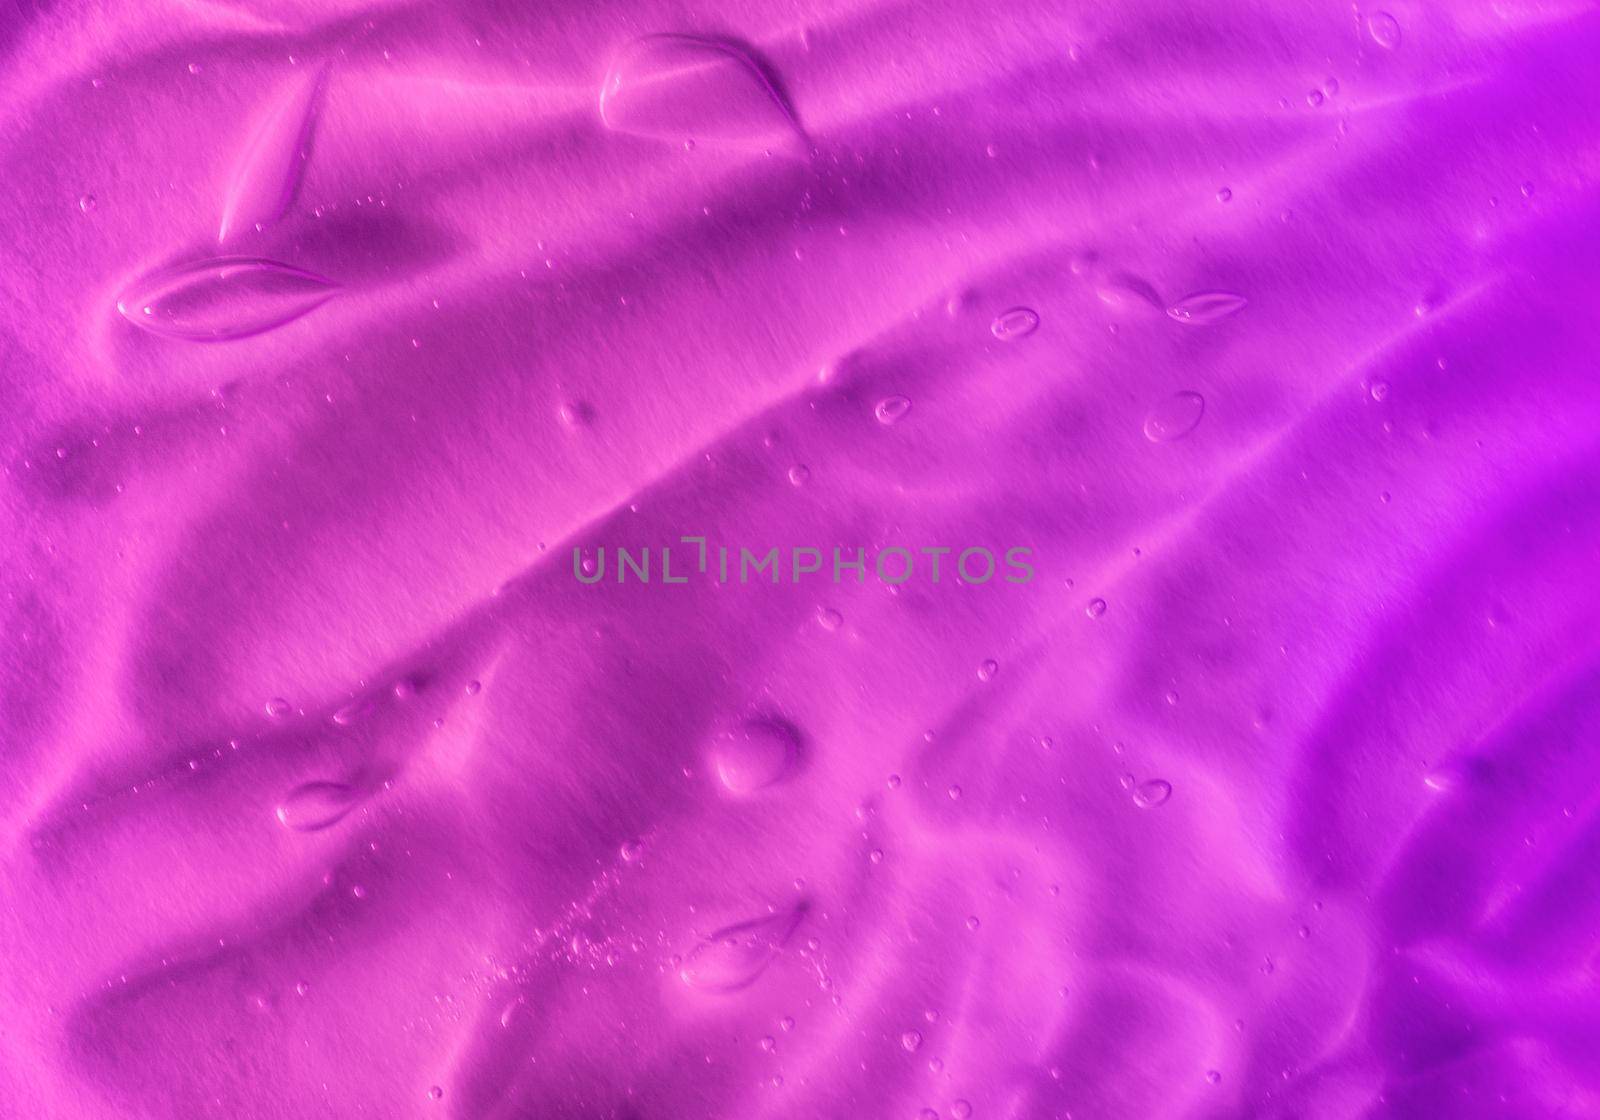 Texture of transparent violet gel with air bubbles and waves on orange background by lavsketch